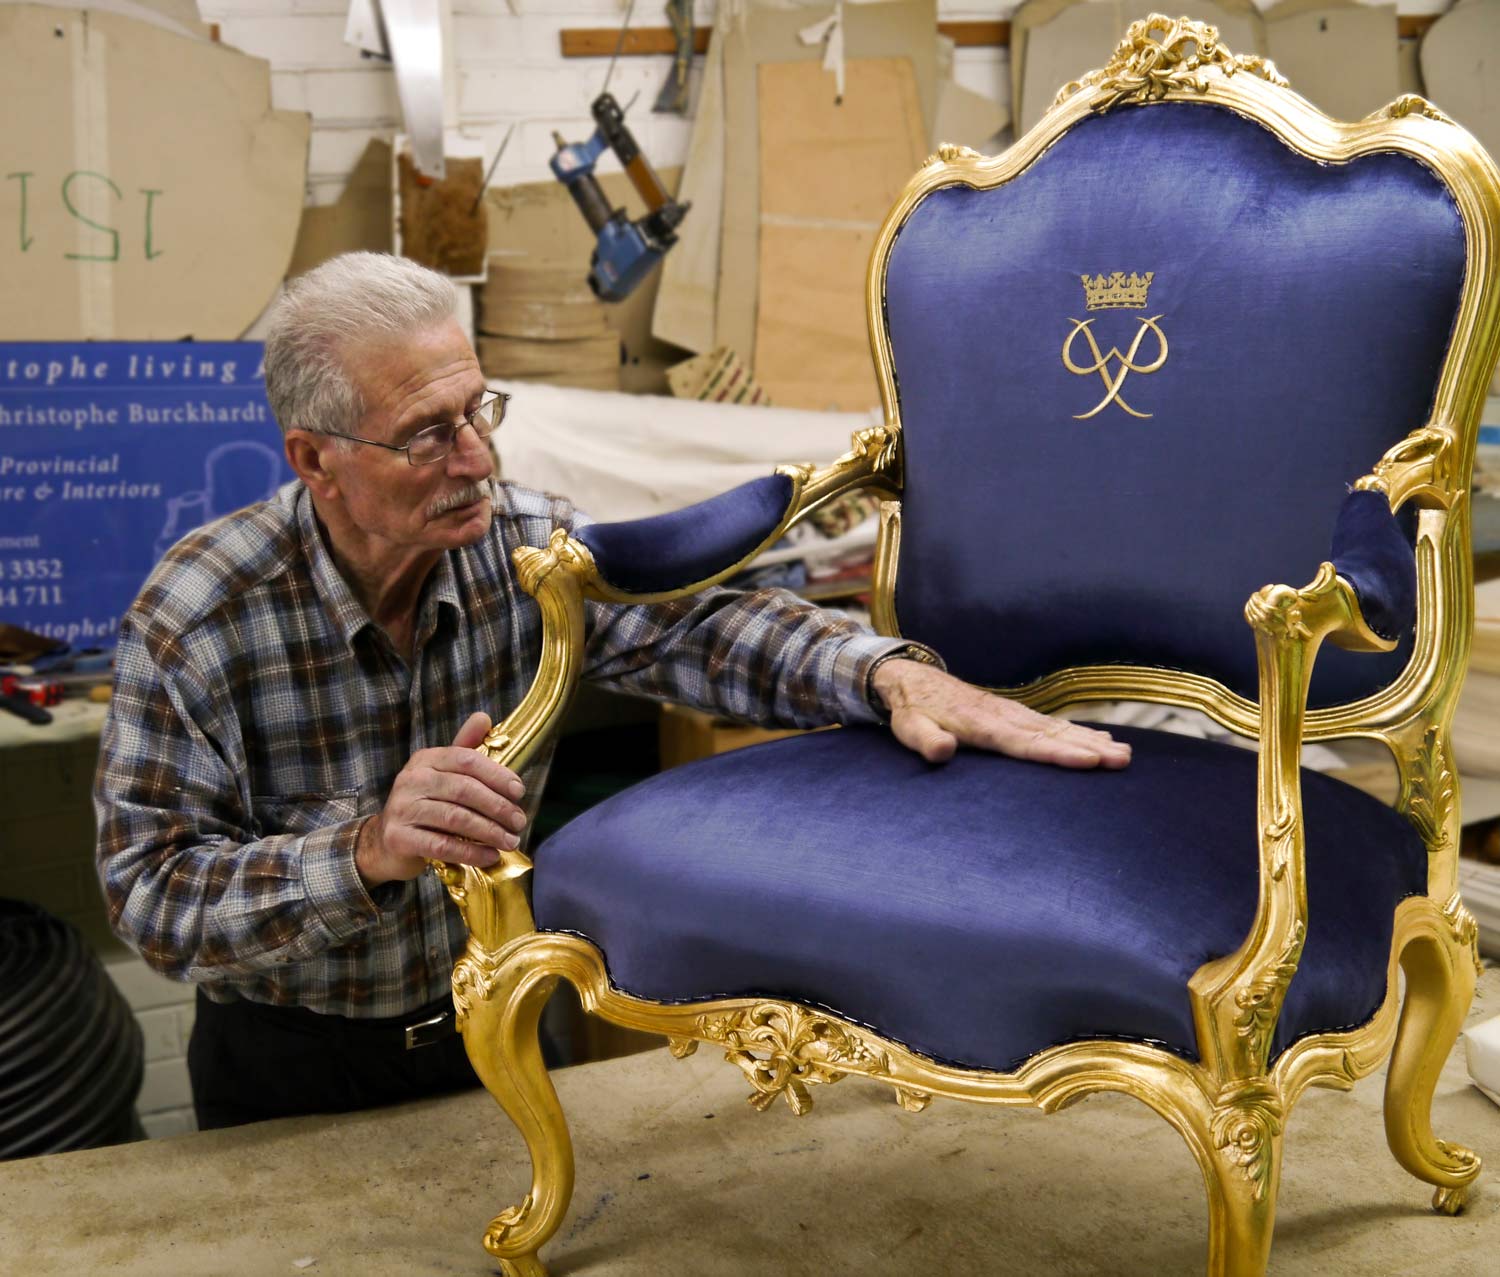 9 Upholsterer checking seat base of louis armchair after upholstery and gilding